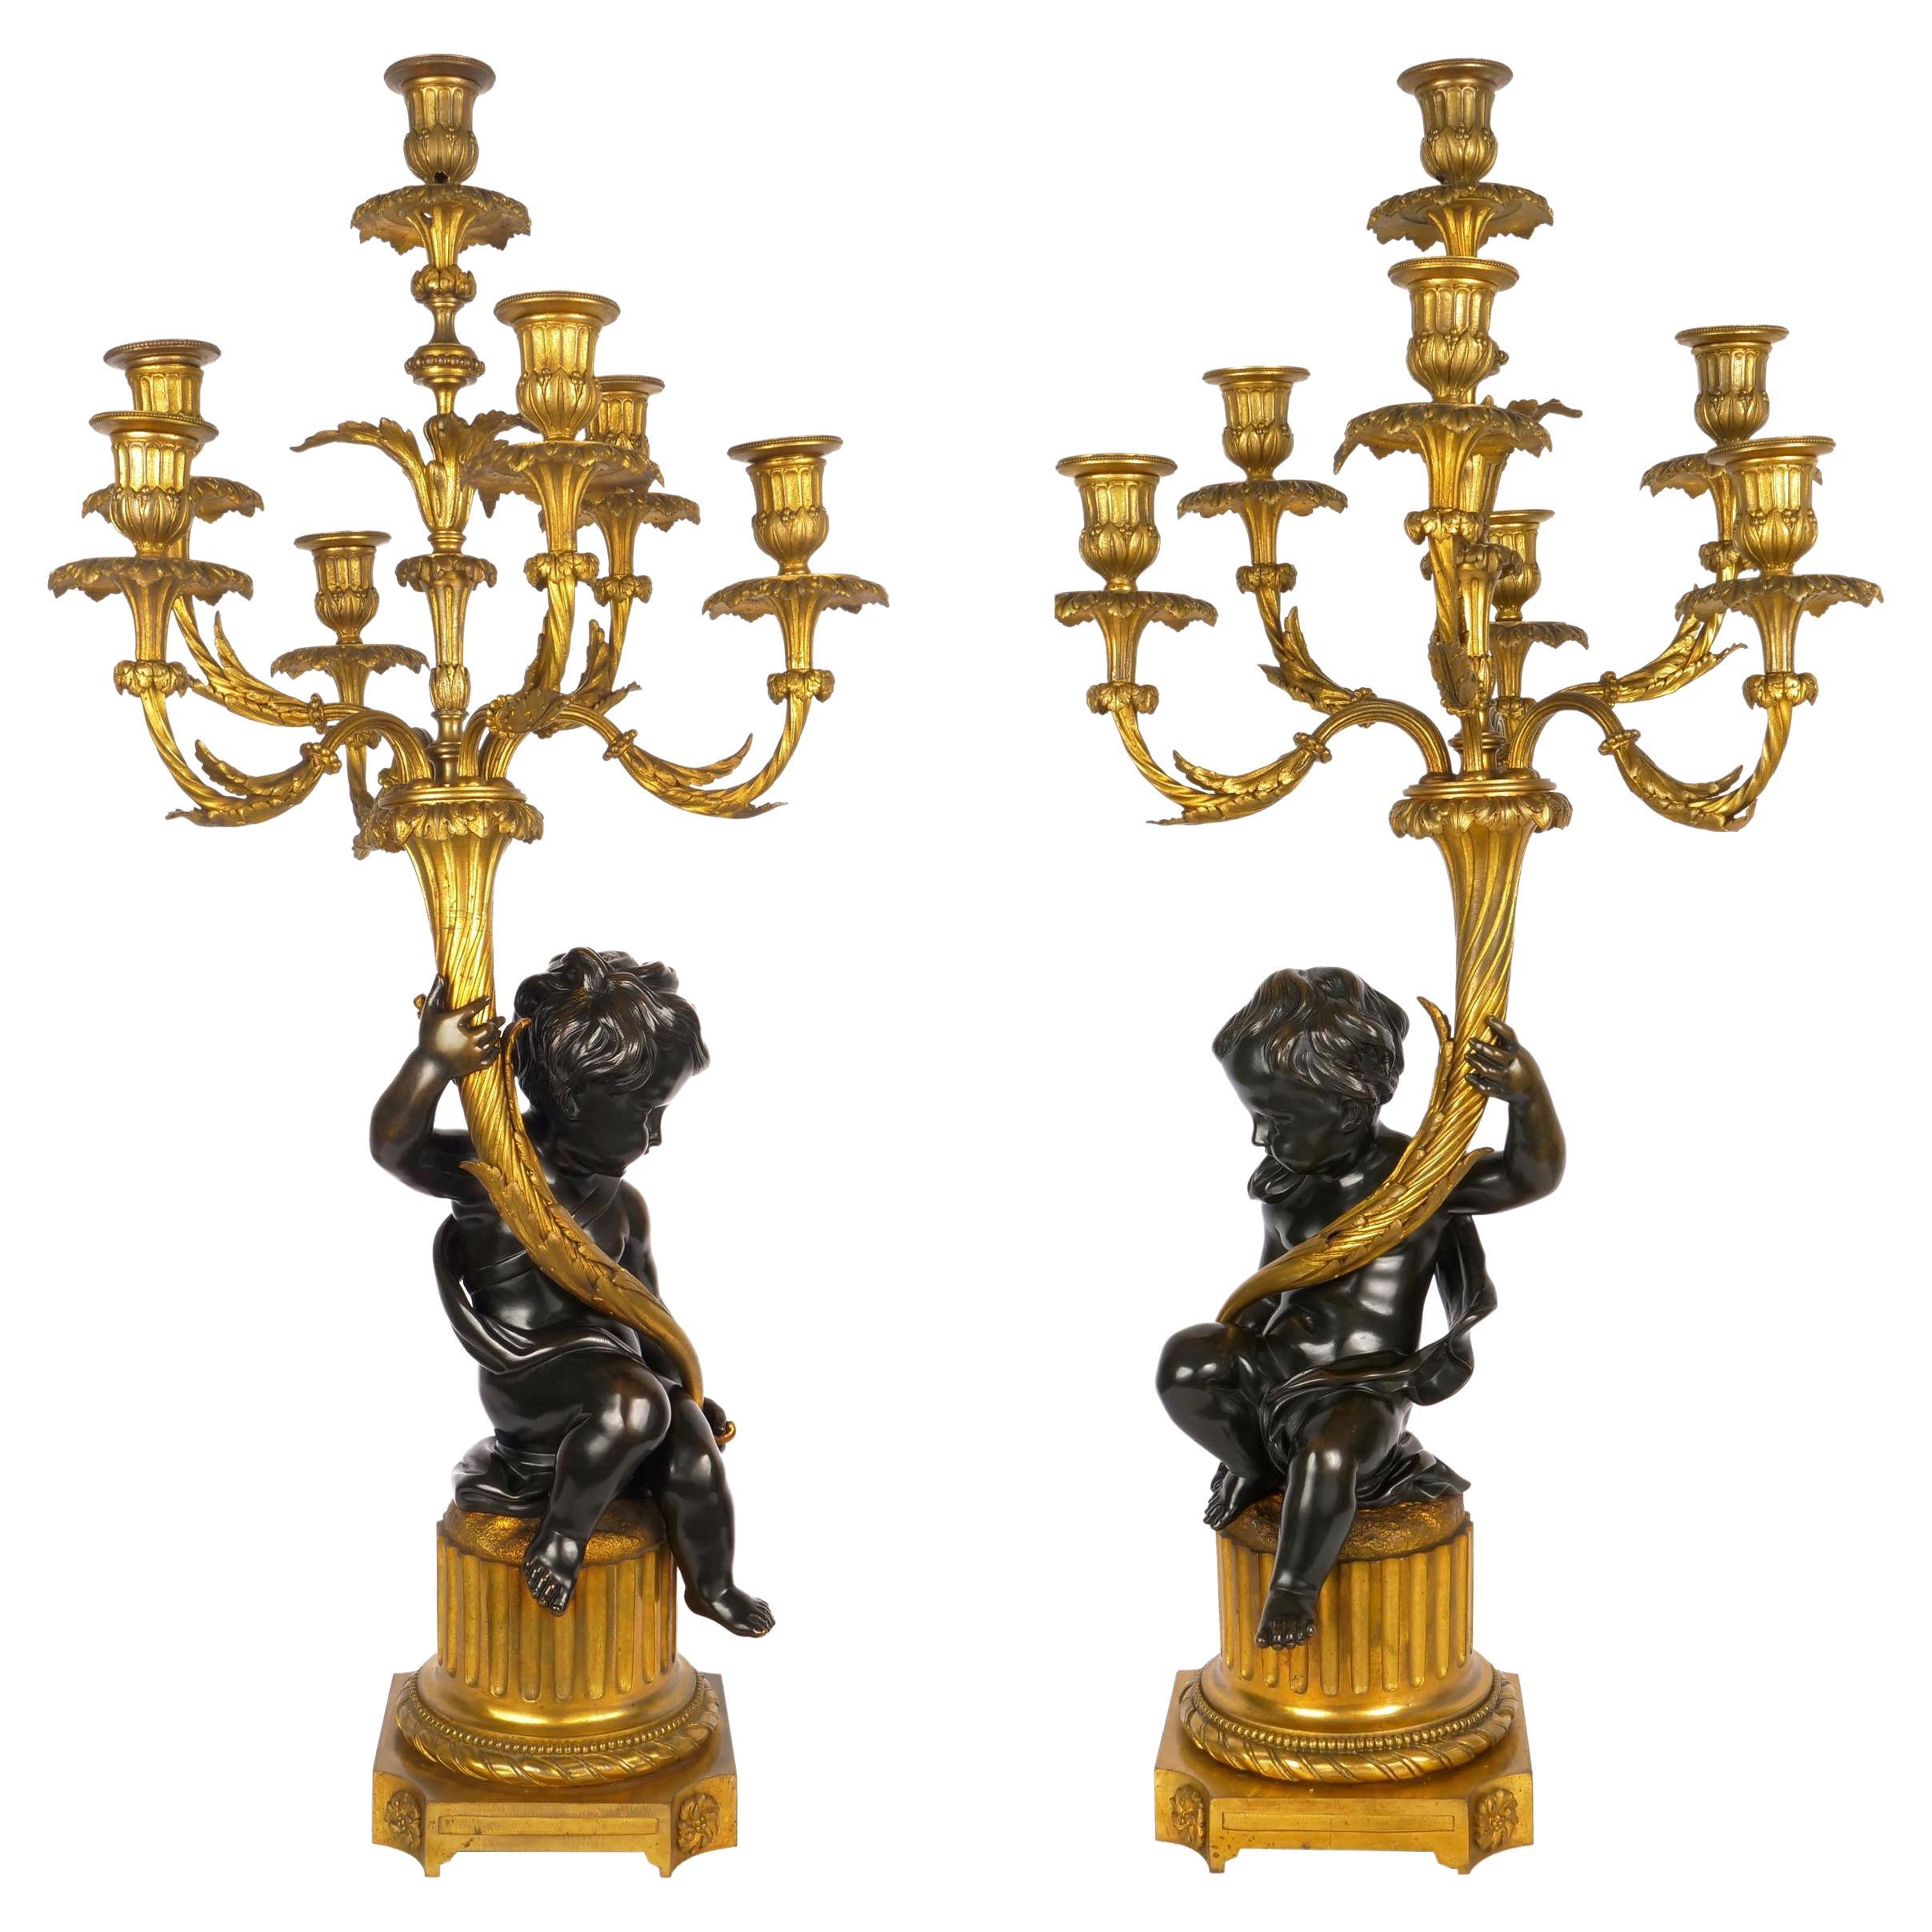 Pair of French Bronze Antique Putto Sculpture Candelabra Lamps, circa 1870-1890 For Sale